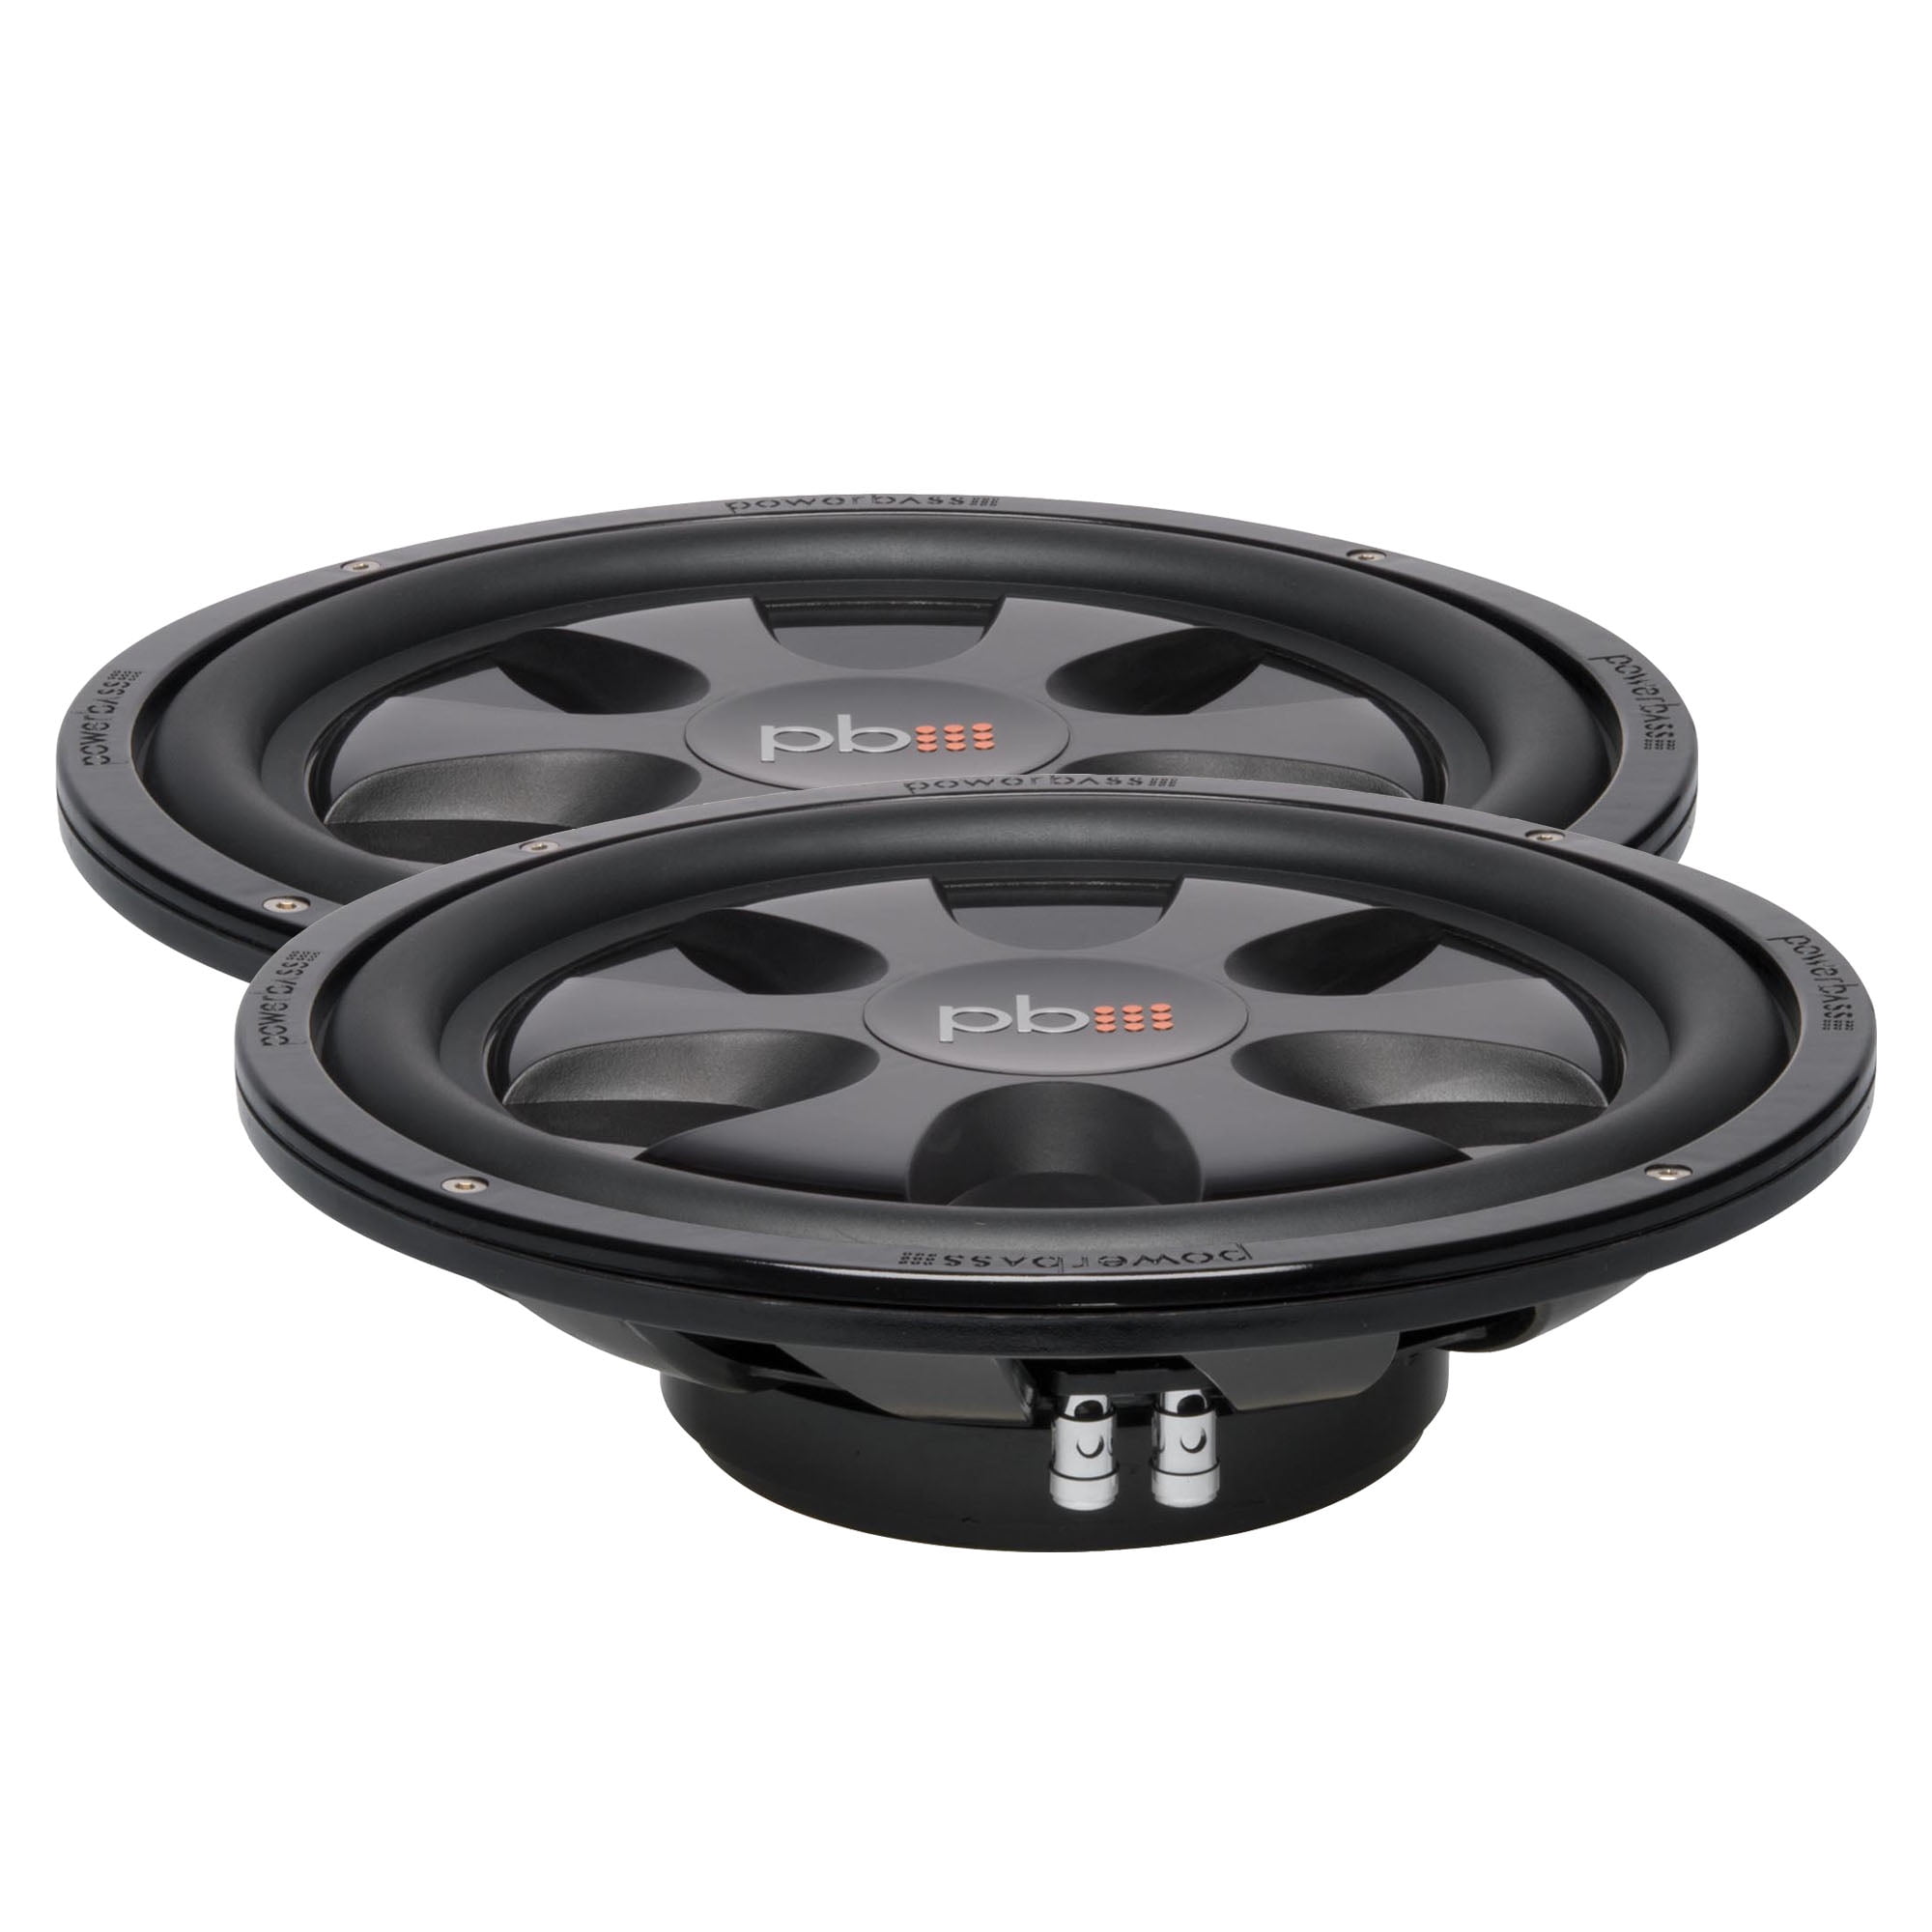 2 MEMPHIS SRXS1244 12" DUAL 4-OHM SHALLOW SUBWOOFERS THIN BASS SPEAKERS NEW 